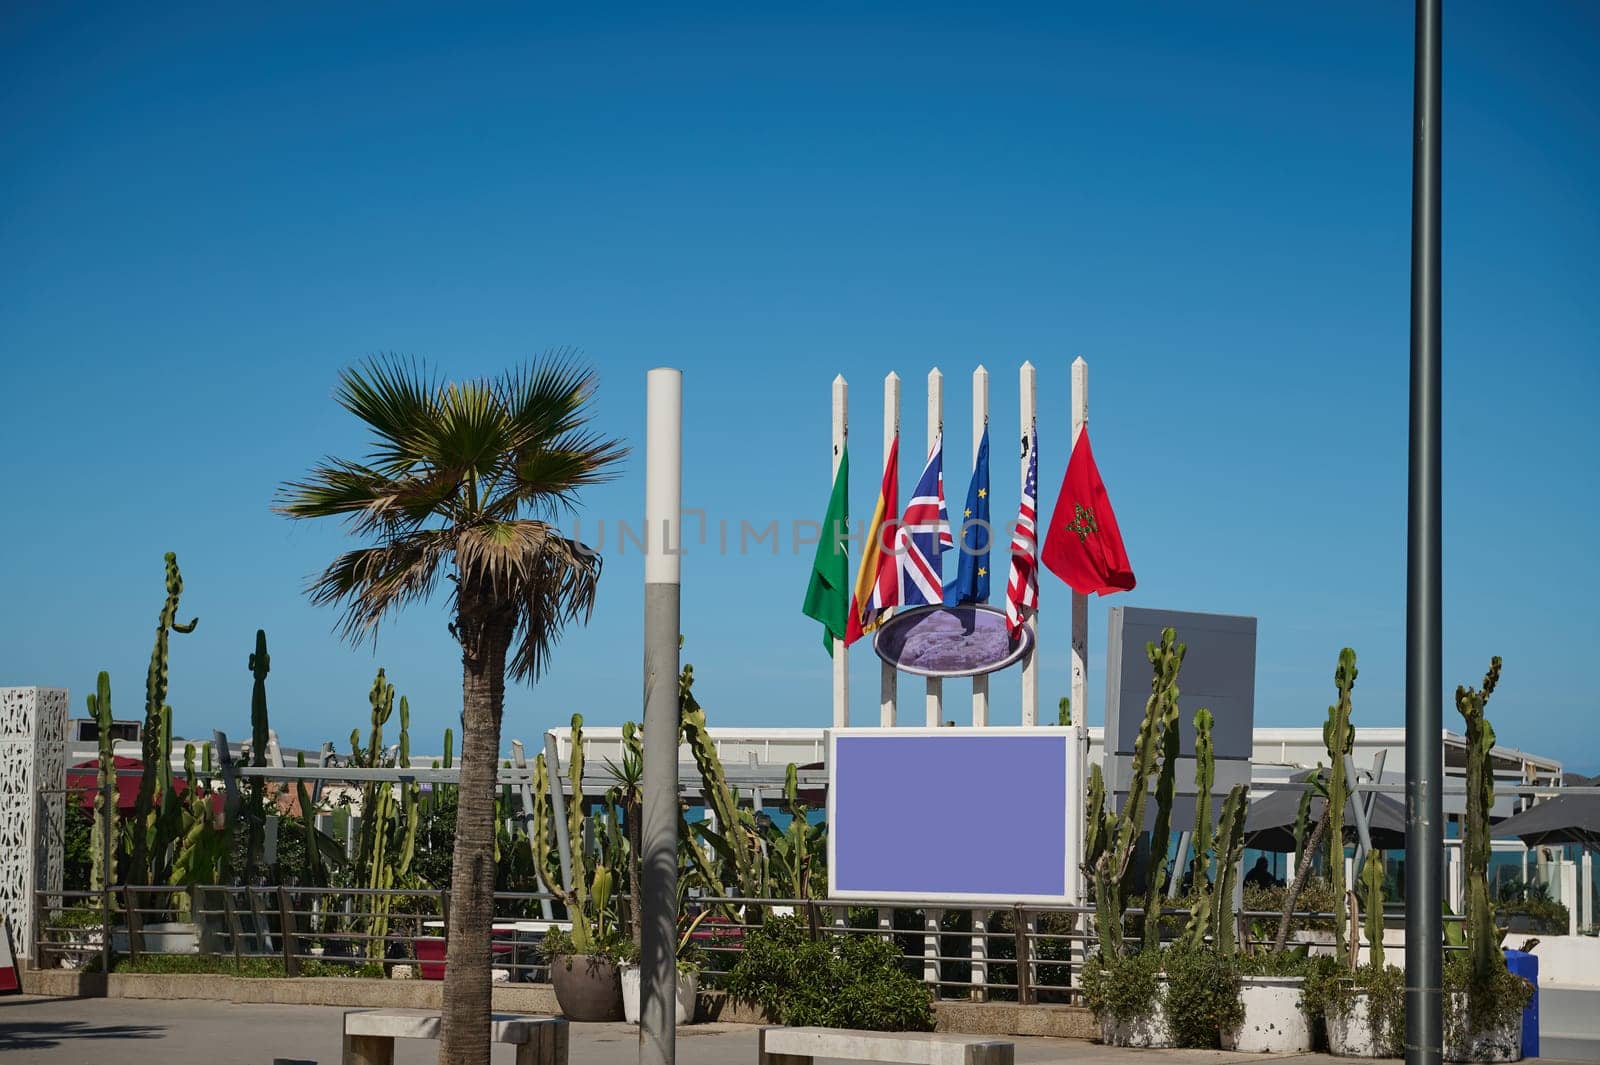 Background with flags of different countries on the promenade. Moroccan, Spanish, European Union, USA and Great Britain flags over blue sky background